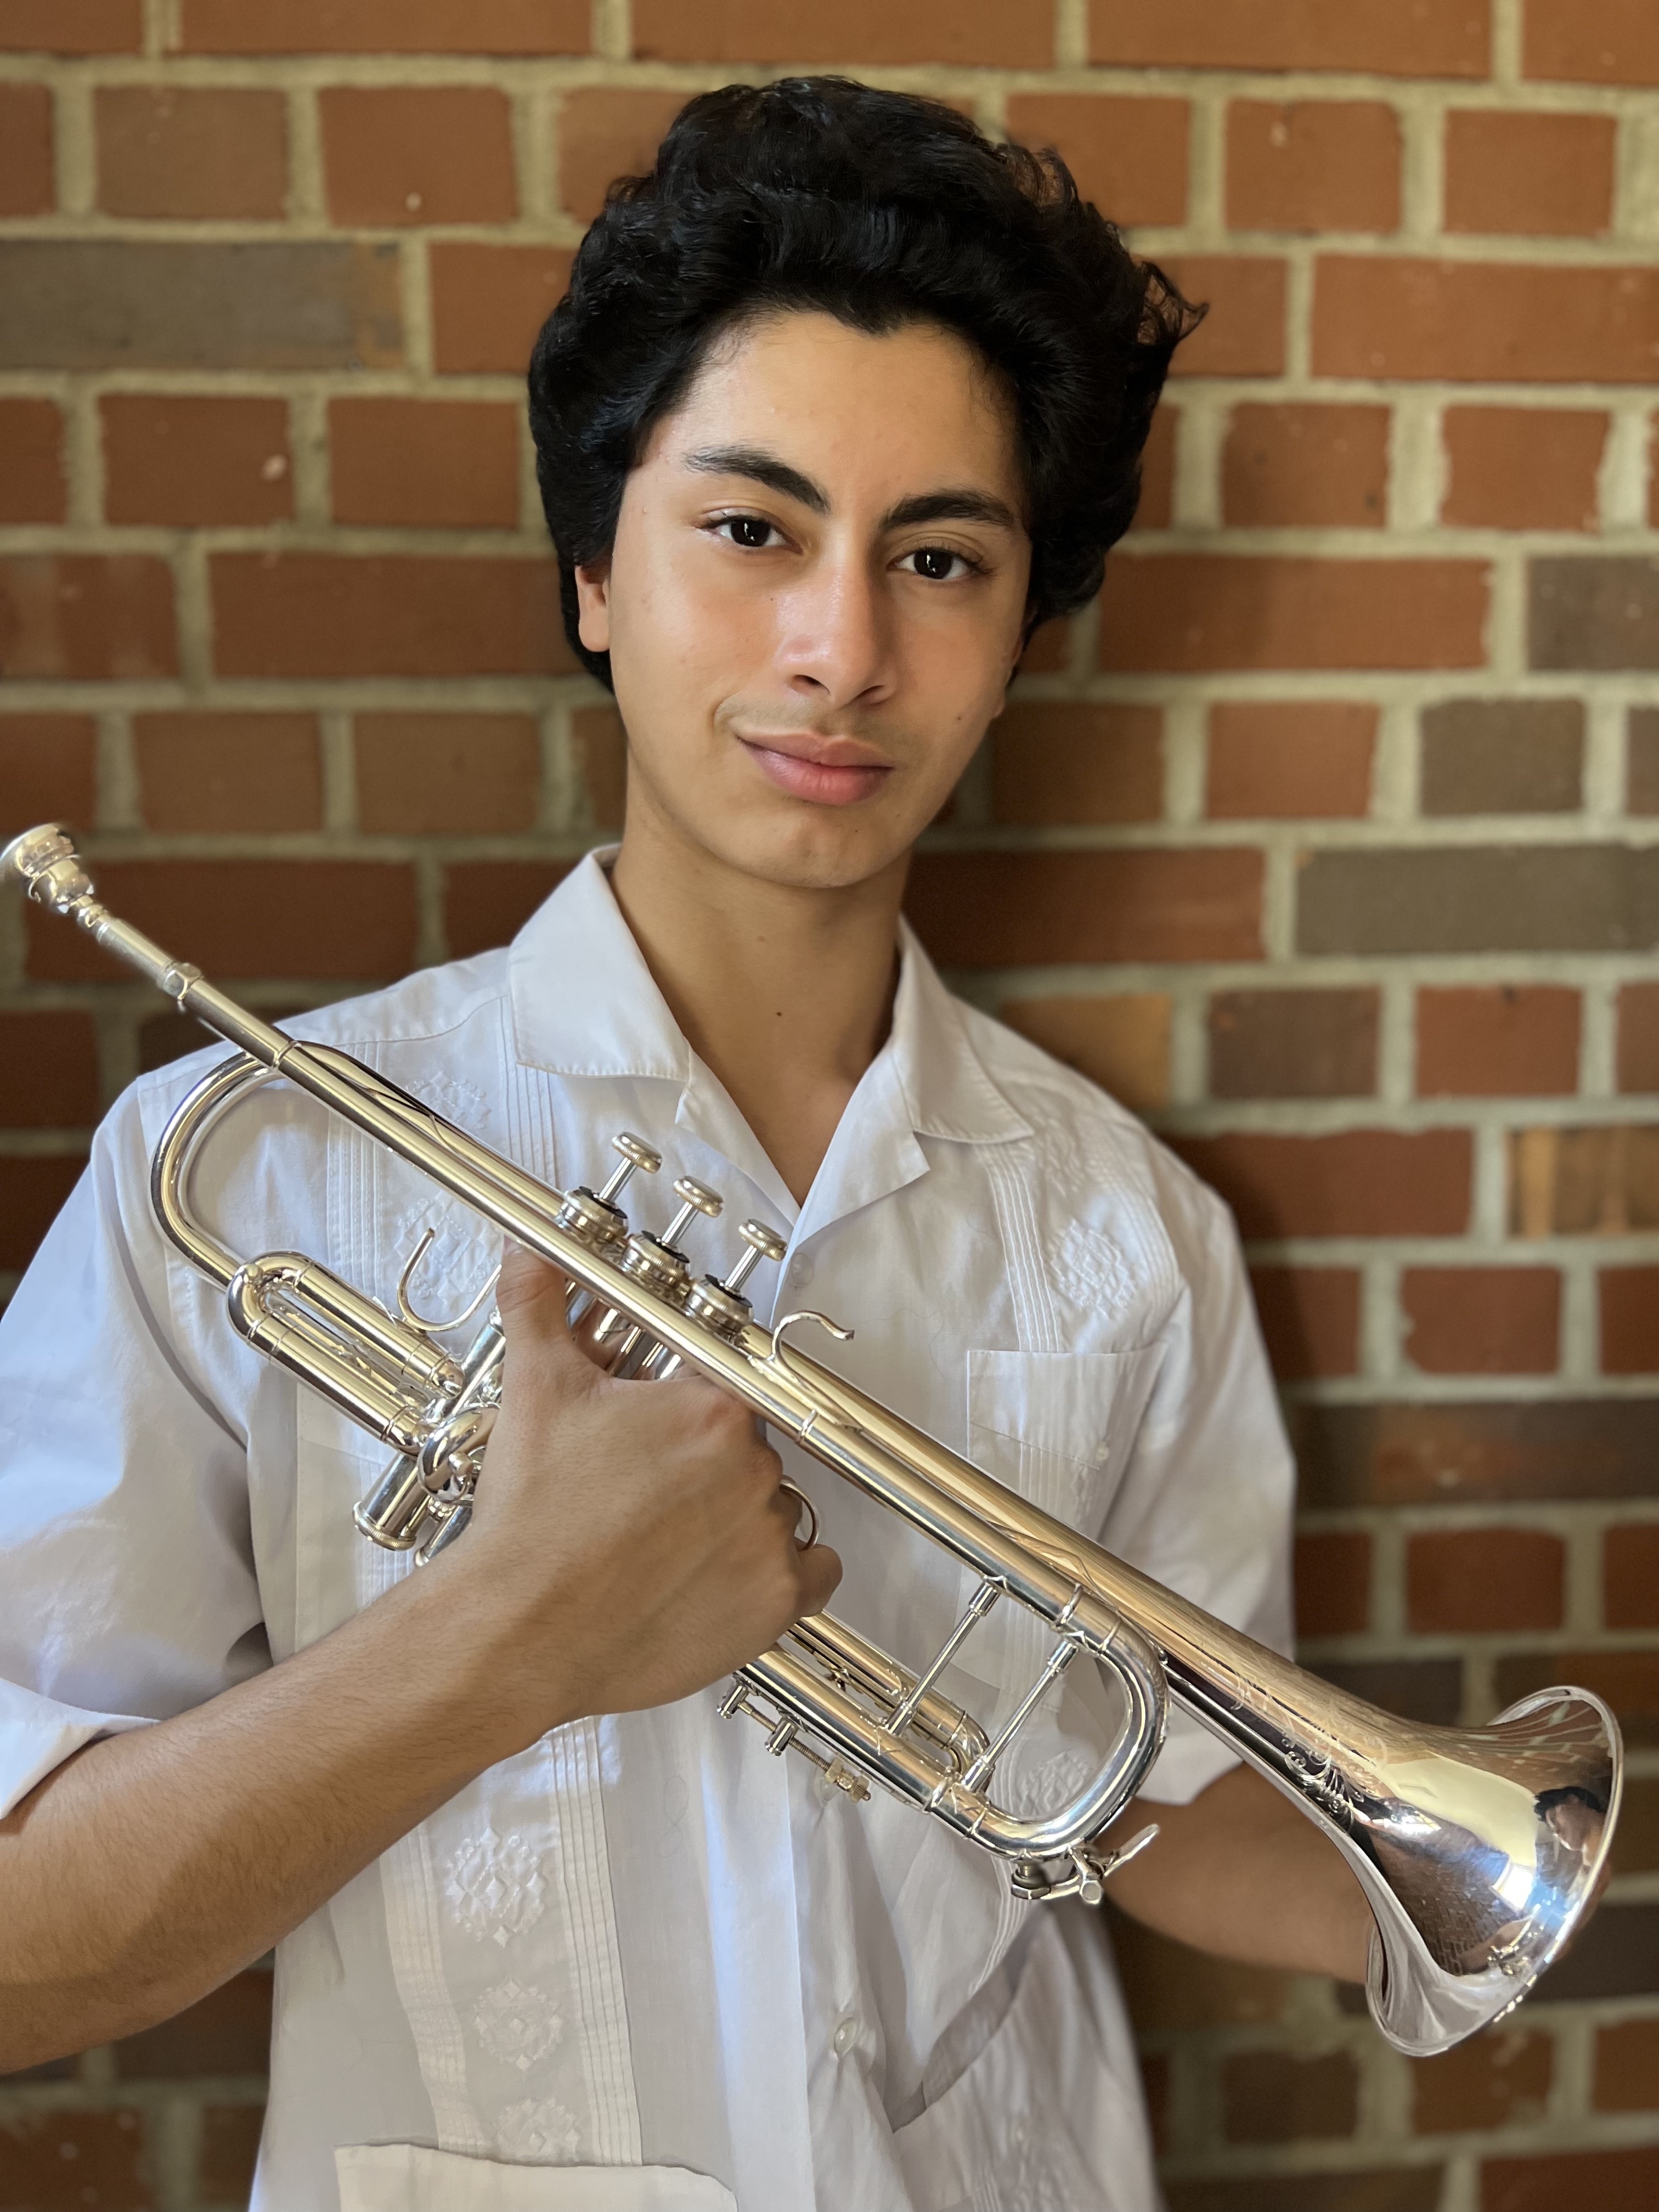 ITG Young Artist Awards - The International Trumpet Guild